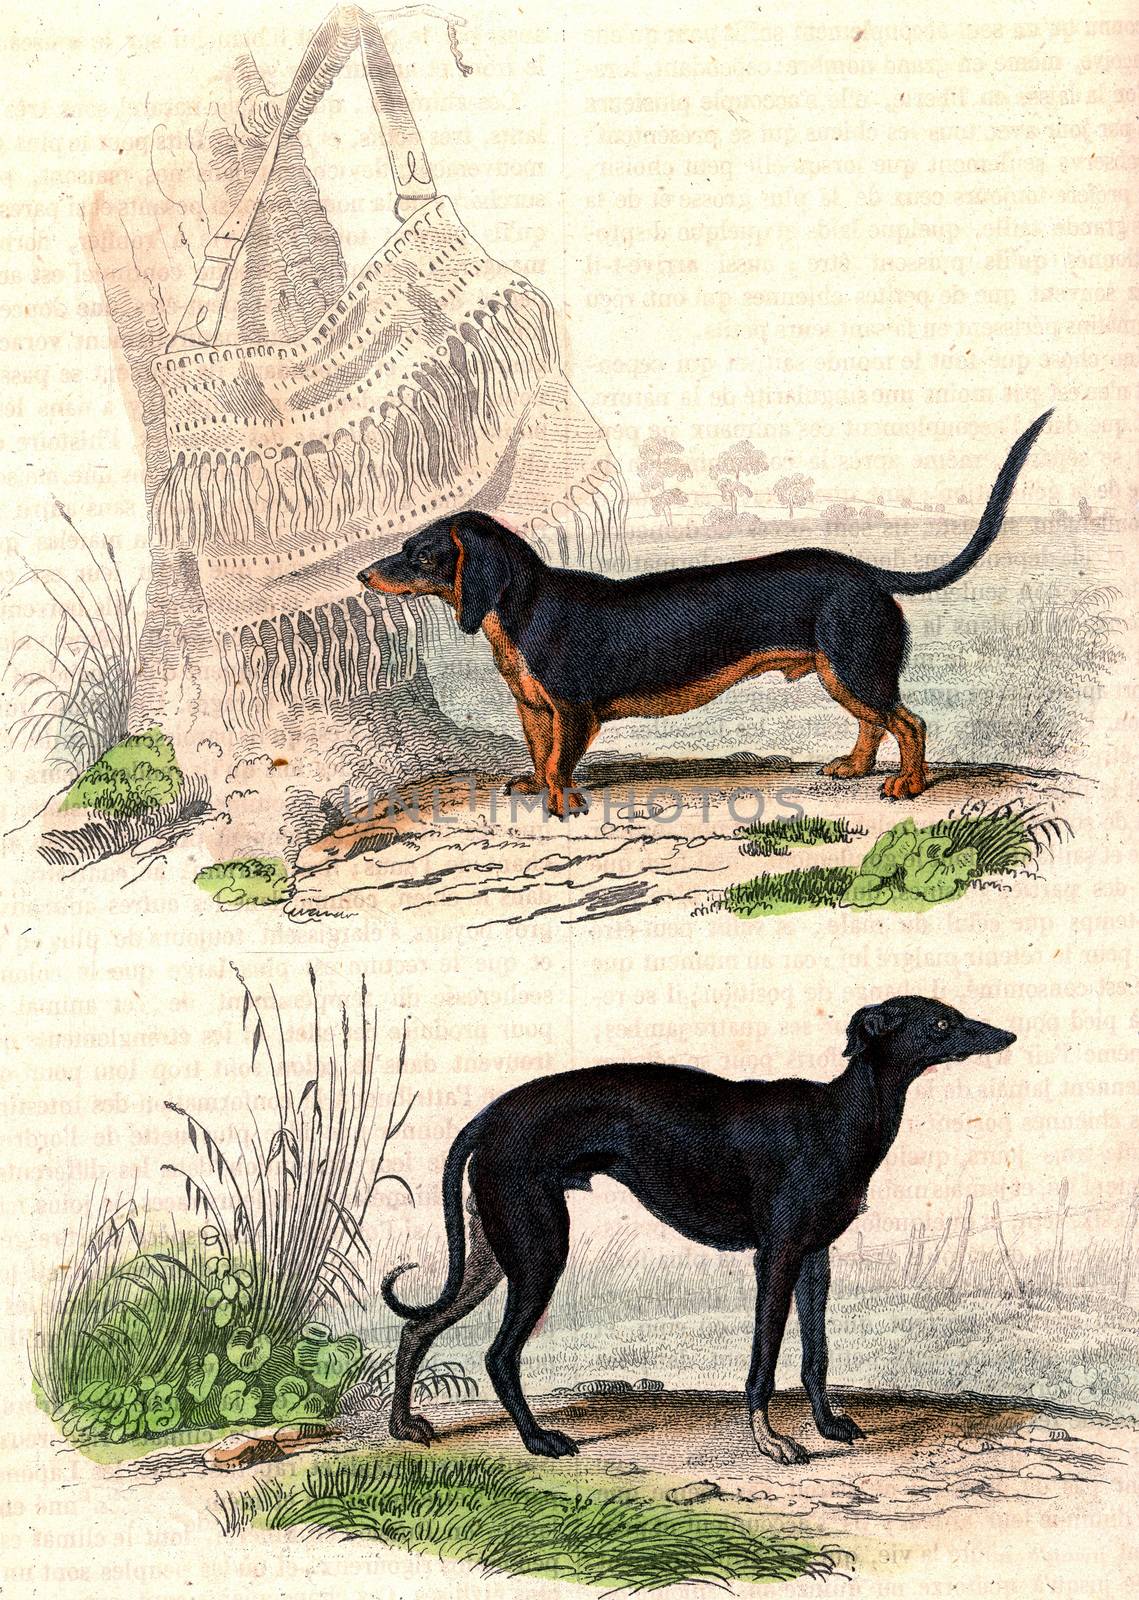 Basset with torso legs, The Greyhound, vintage engraving. by Morphart